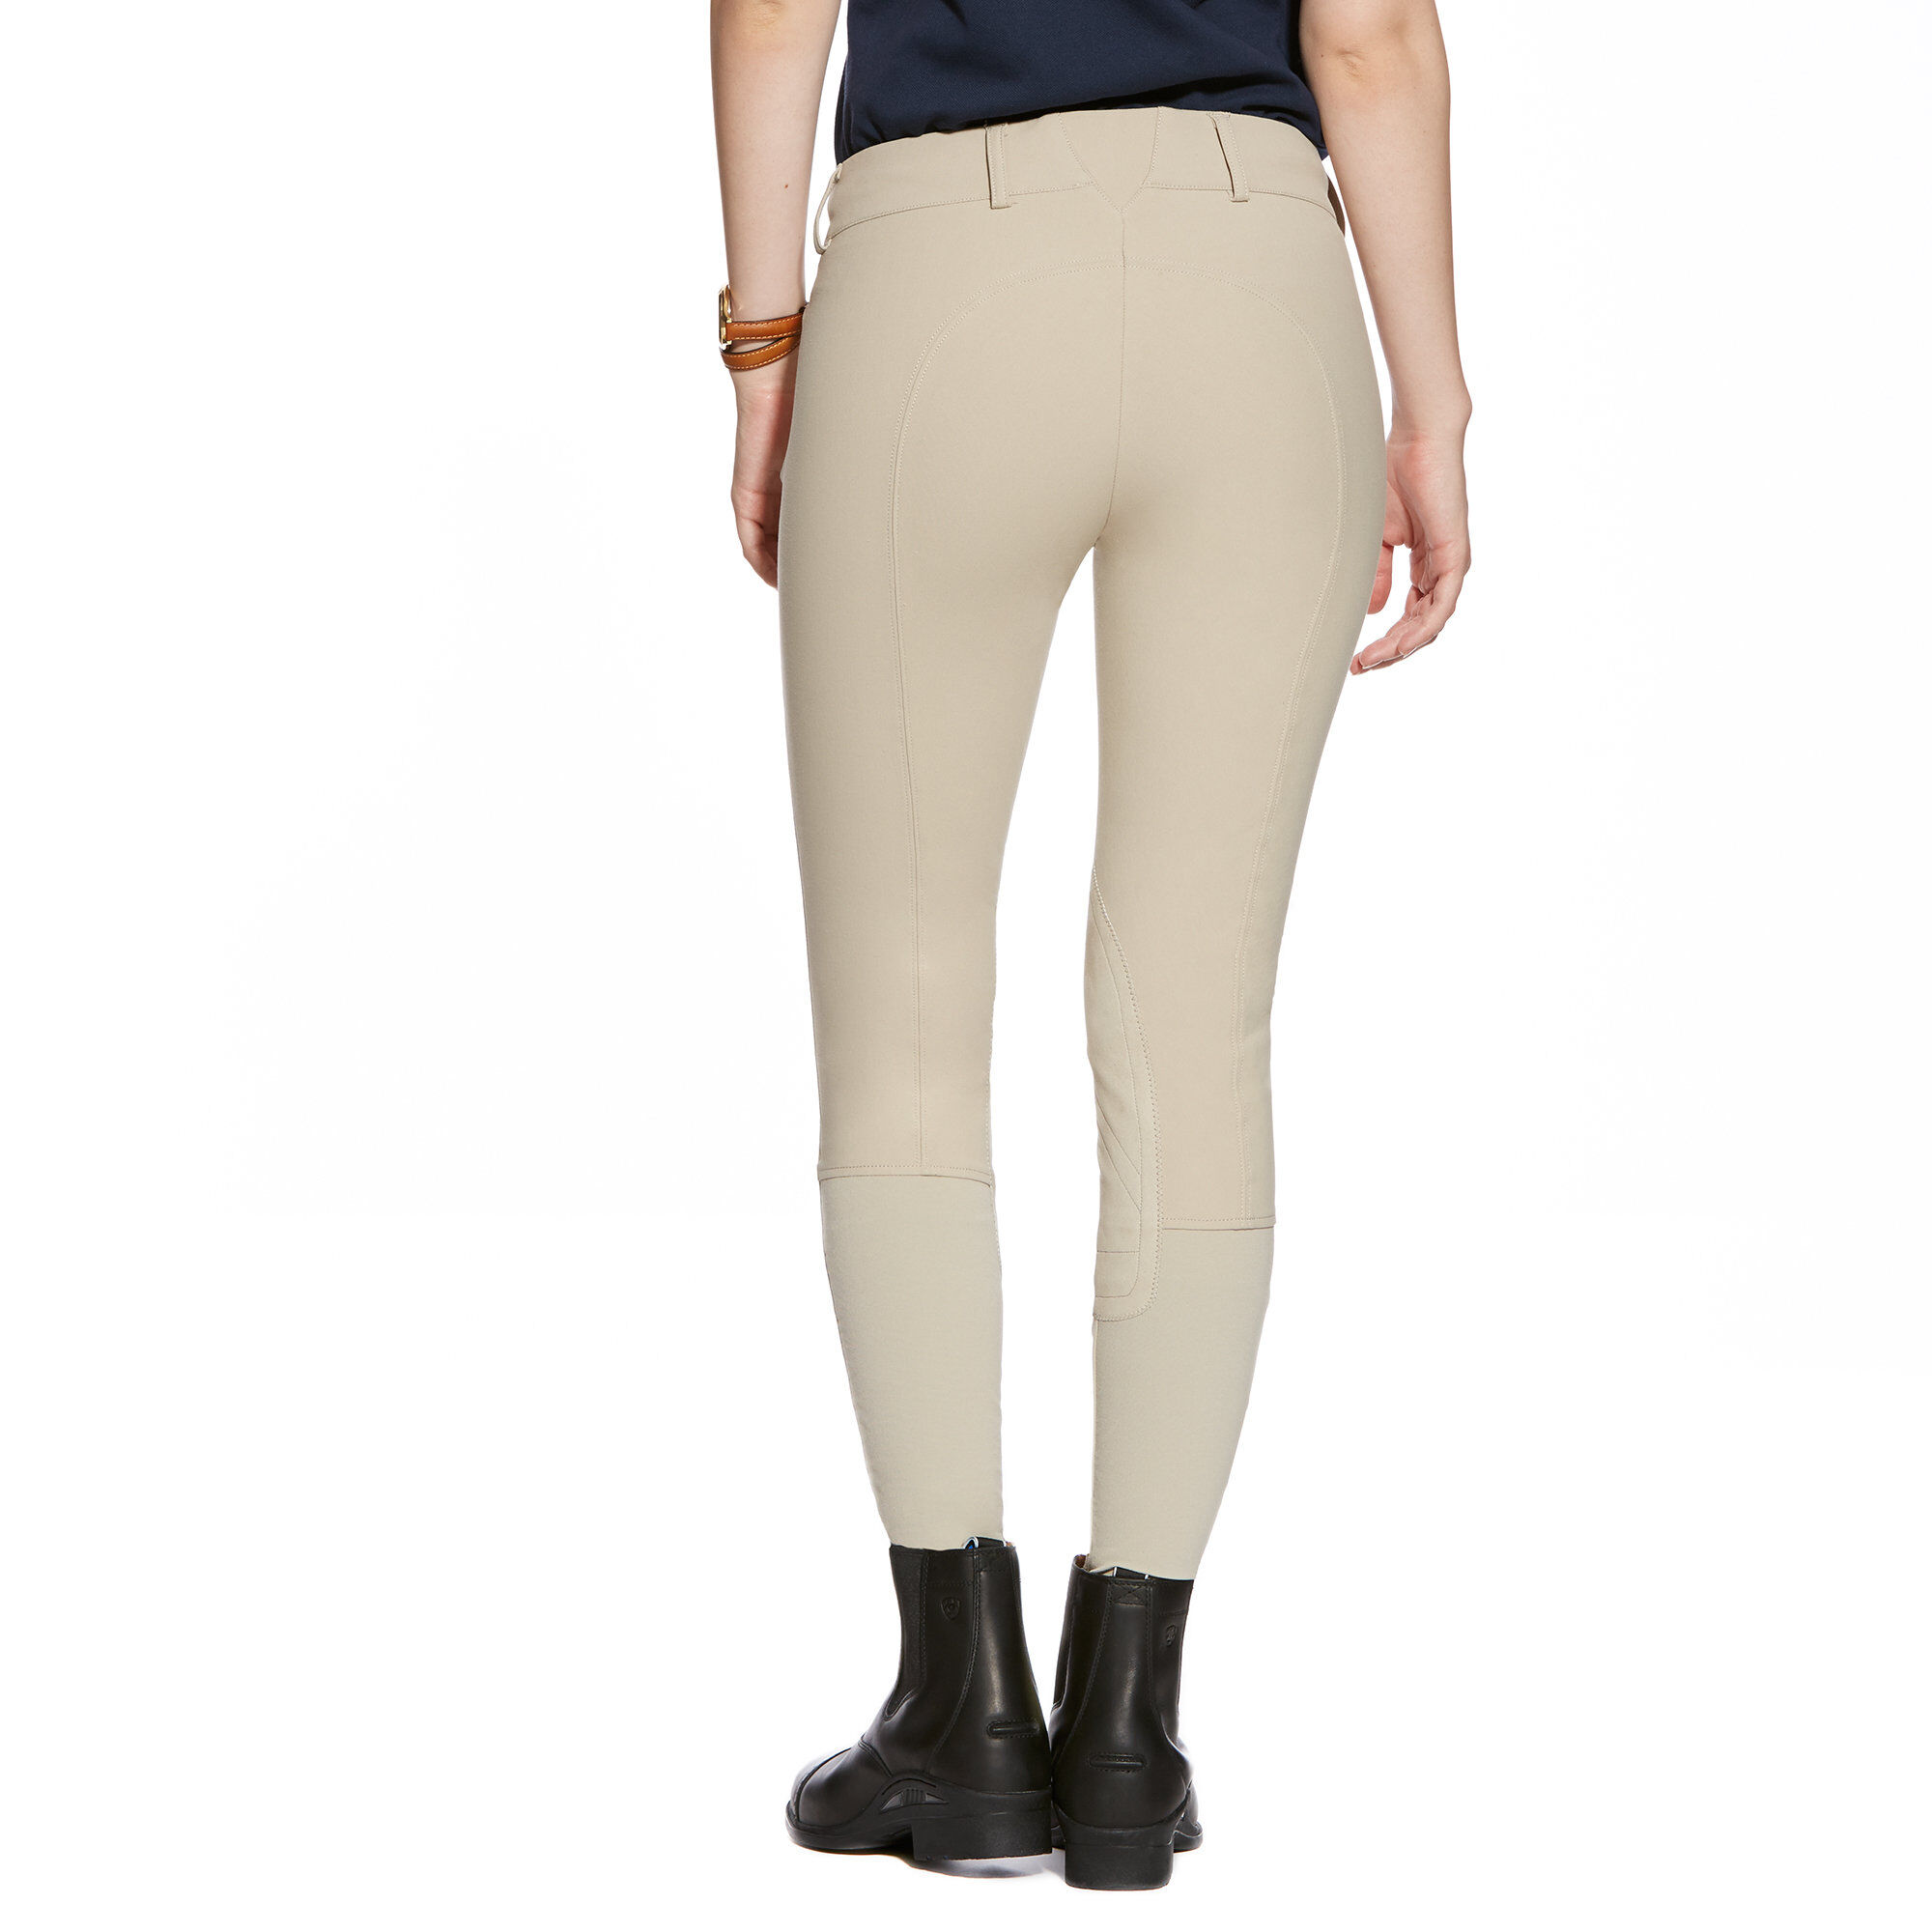 Ariat Pro Series Riding Pants Breeches Equestrian Size 32L Long Tan Olympia